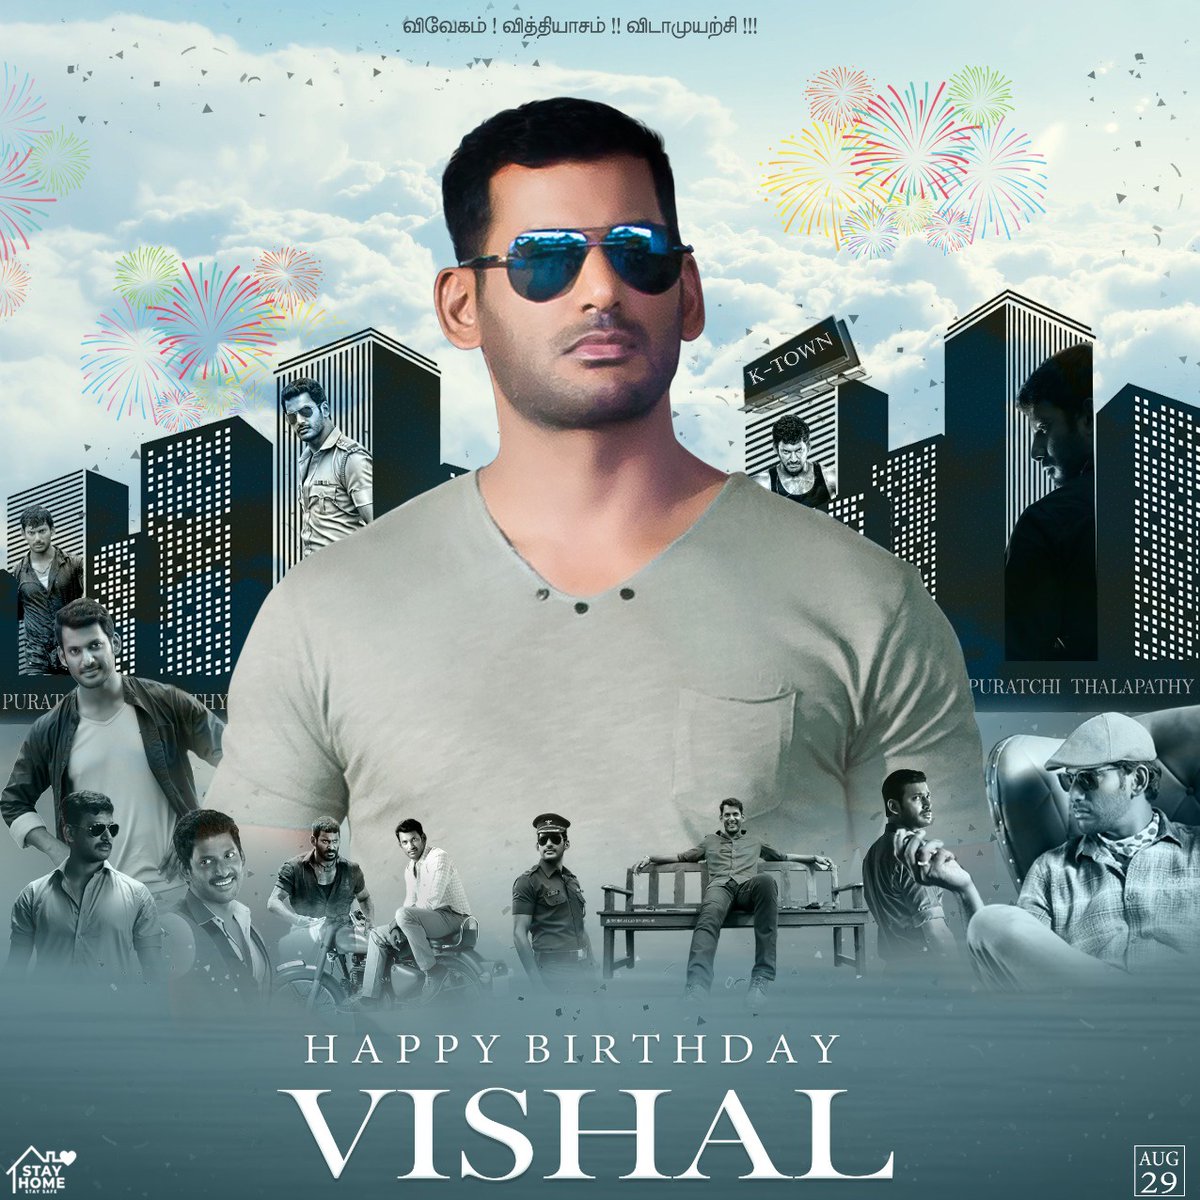 The birthday celebration begins, here is the Common DP for #Vishal birthday celebration, happy birthday dear @VishalKOfficial anna. Hearty thanks for all celebrities and loveable fans who took part in releasing the #CommonDP

#HBDVishal 
#HappyBirthdayVishal 
#VishalBdayCDP